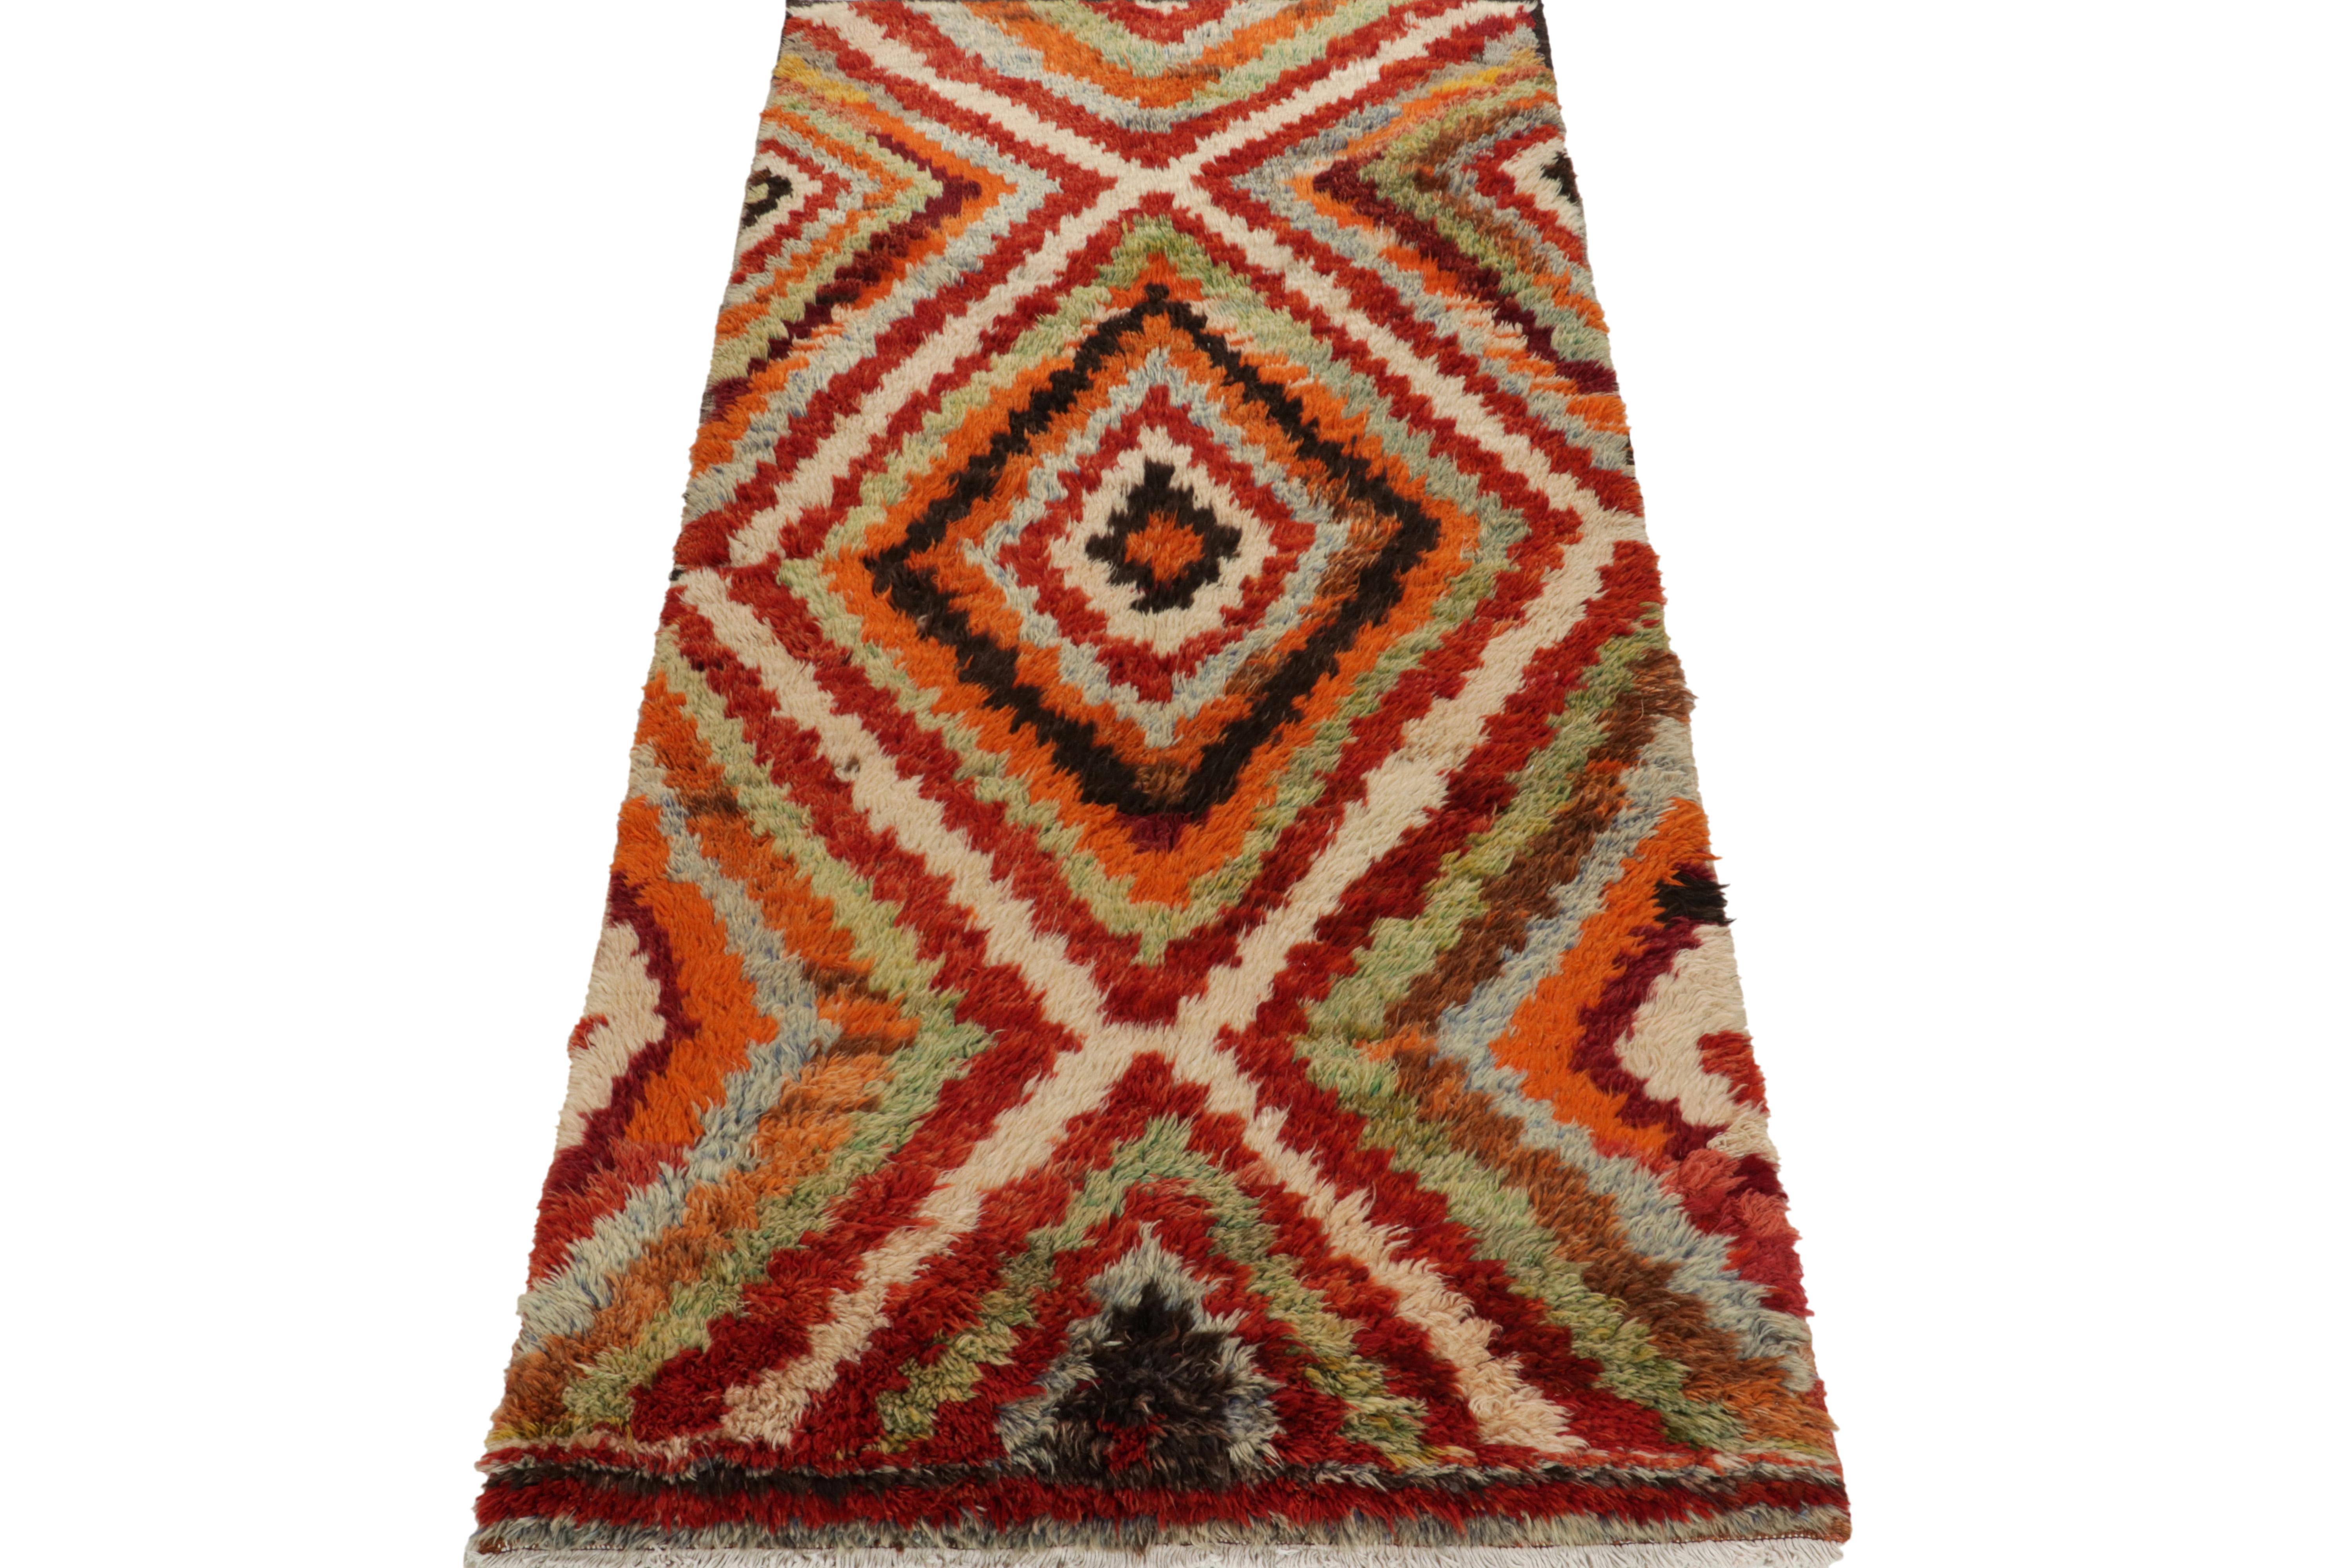 Hand-knotted in wool, a 4x10 vintage Tulu runner originating from Turkey circa 1950-1960, now joining Rug & Kilim’s Antique & Vintage collection. 

On the Design: The healthy shag pile enjoys a rare tribal geometric pattern in orange, red, white &